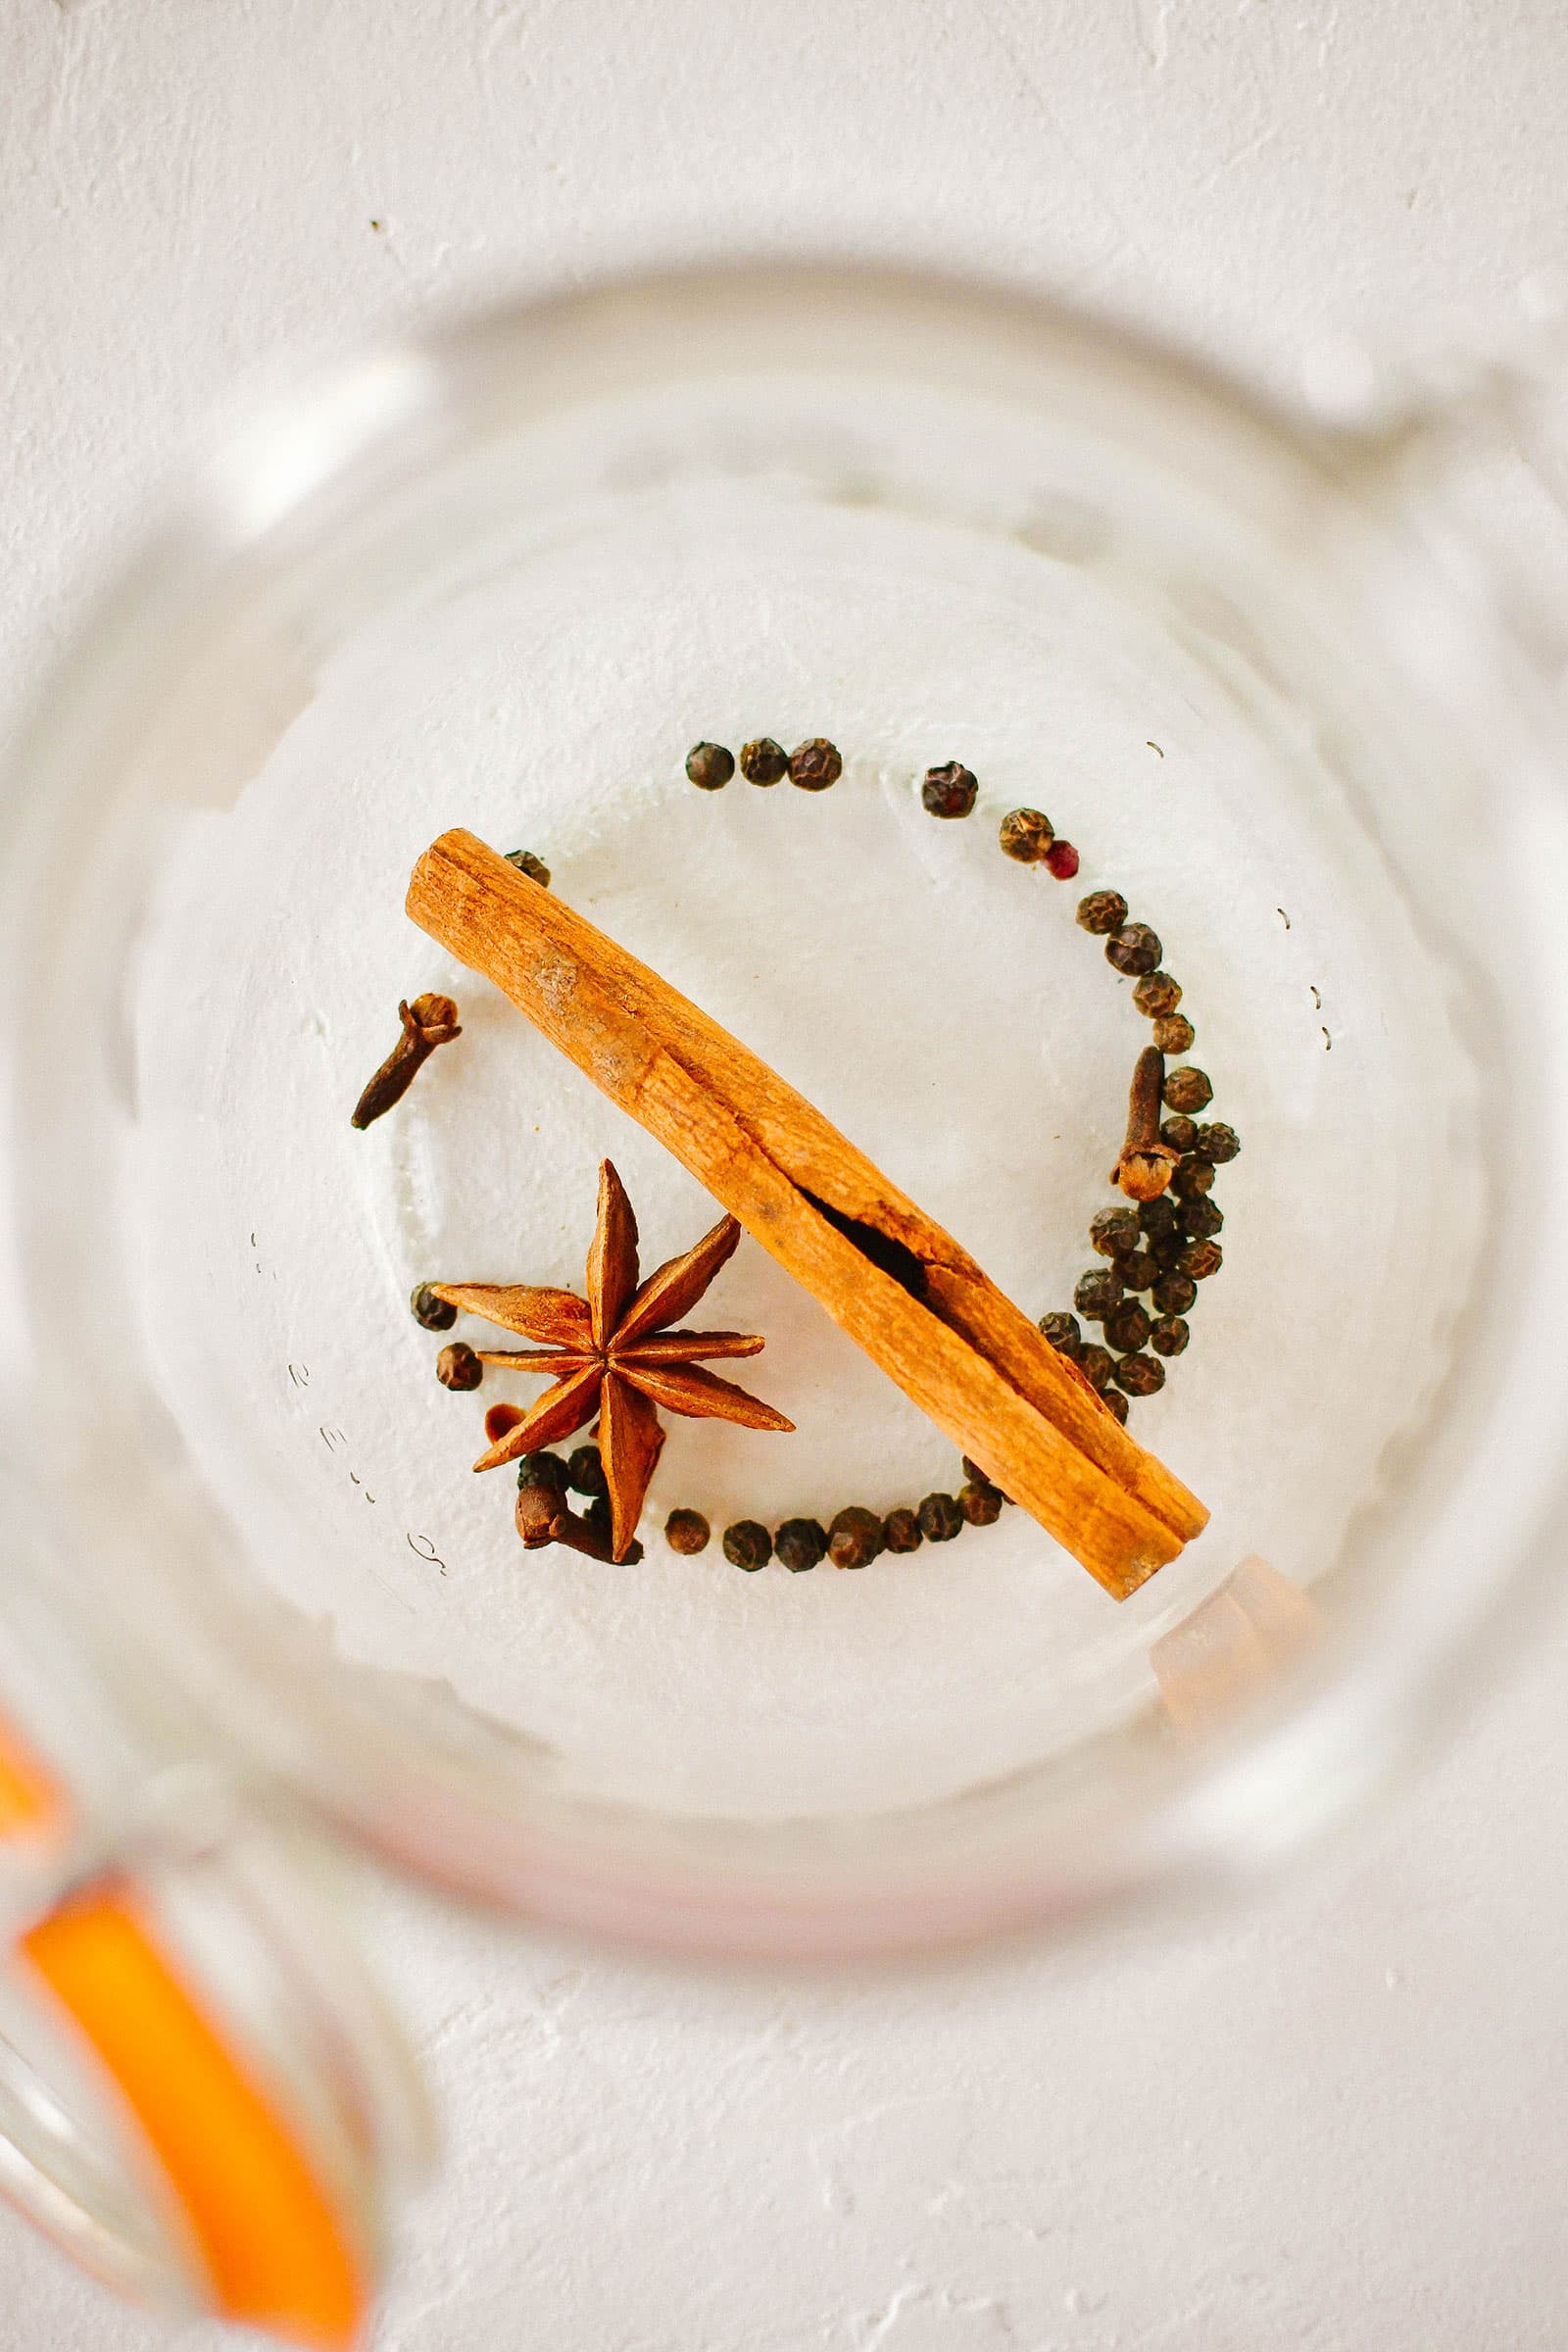 Bowl of water with peppercorns, cloves, star anise, and a cinnamon stick in it